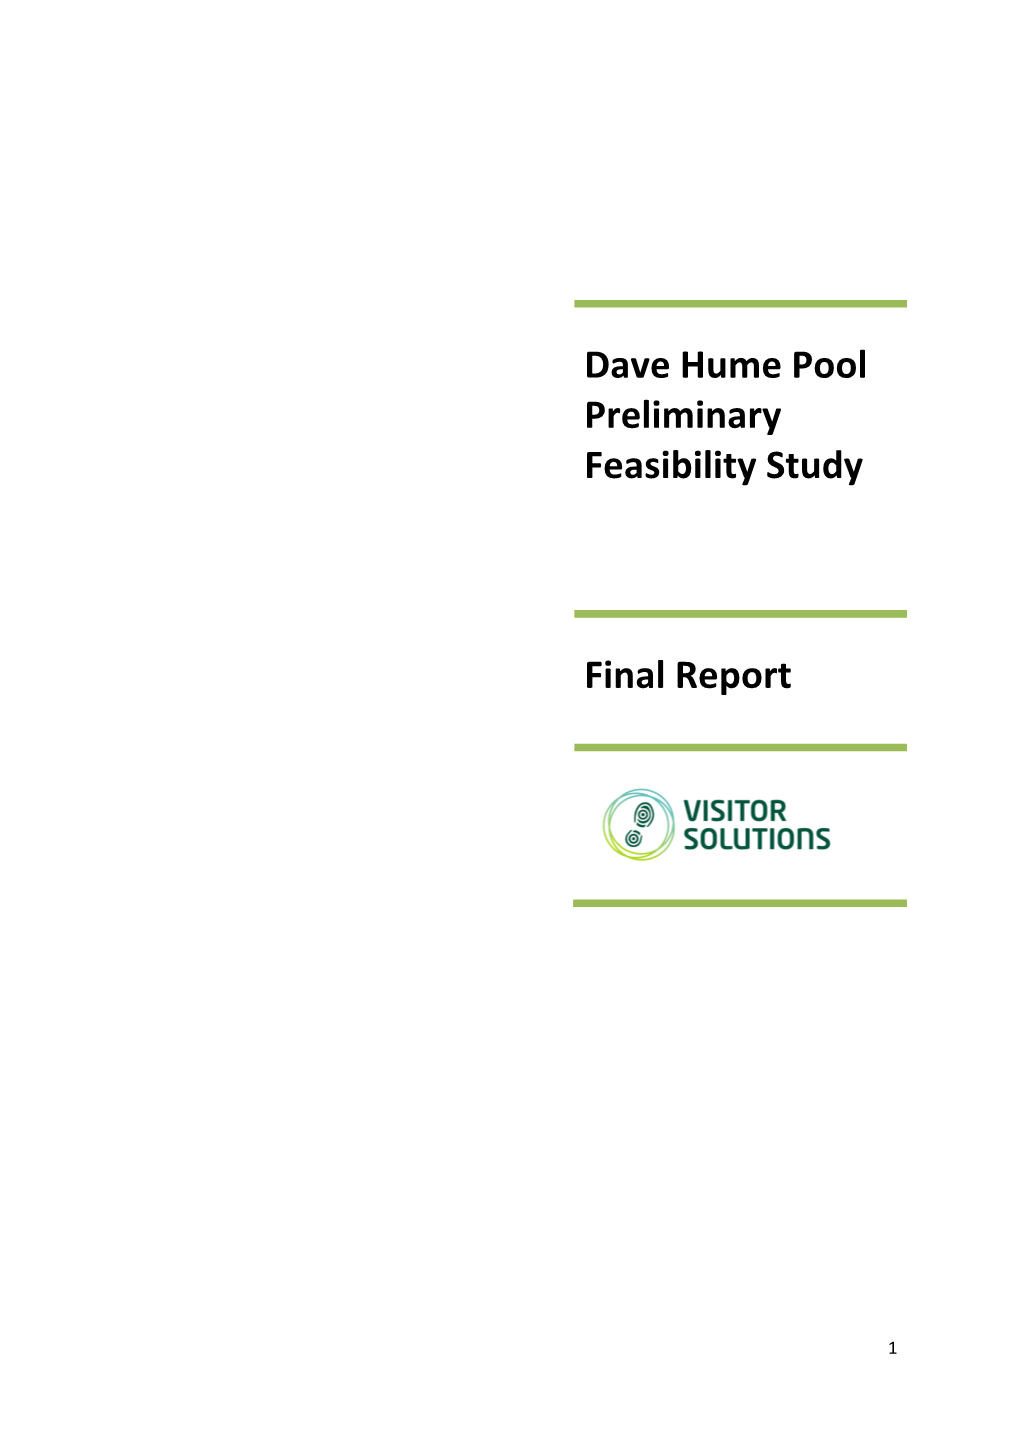 Dave Hume Pool Preliminary Feasibility Study Final Report